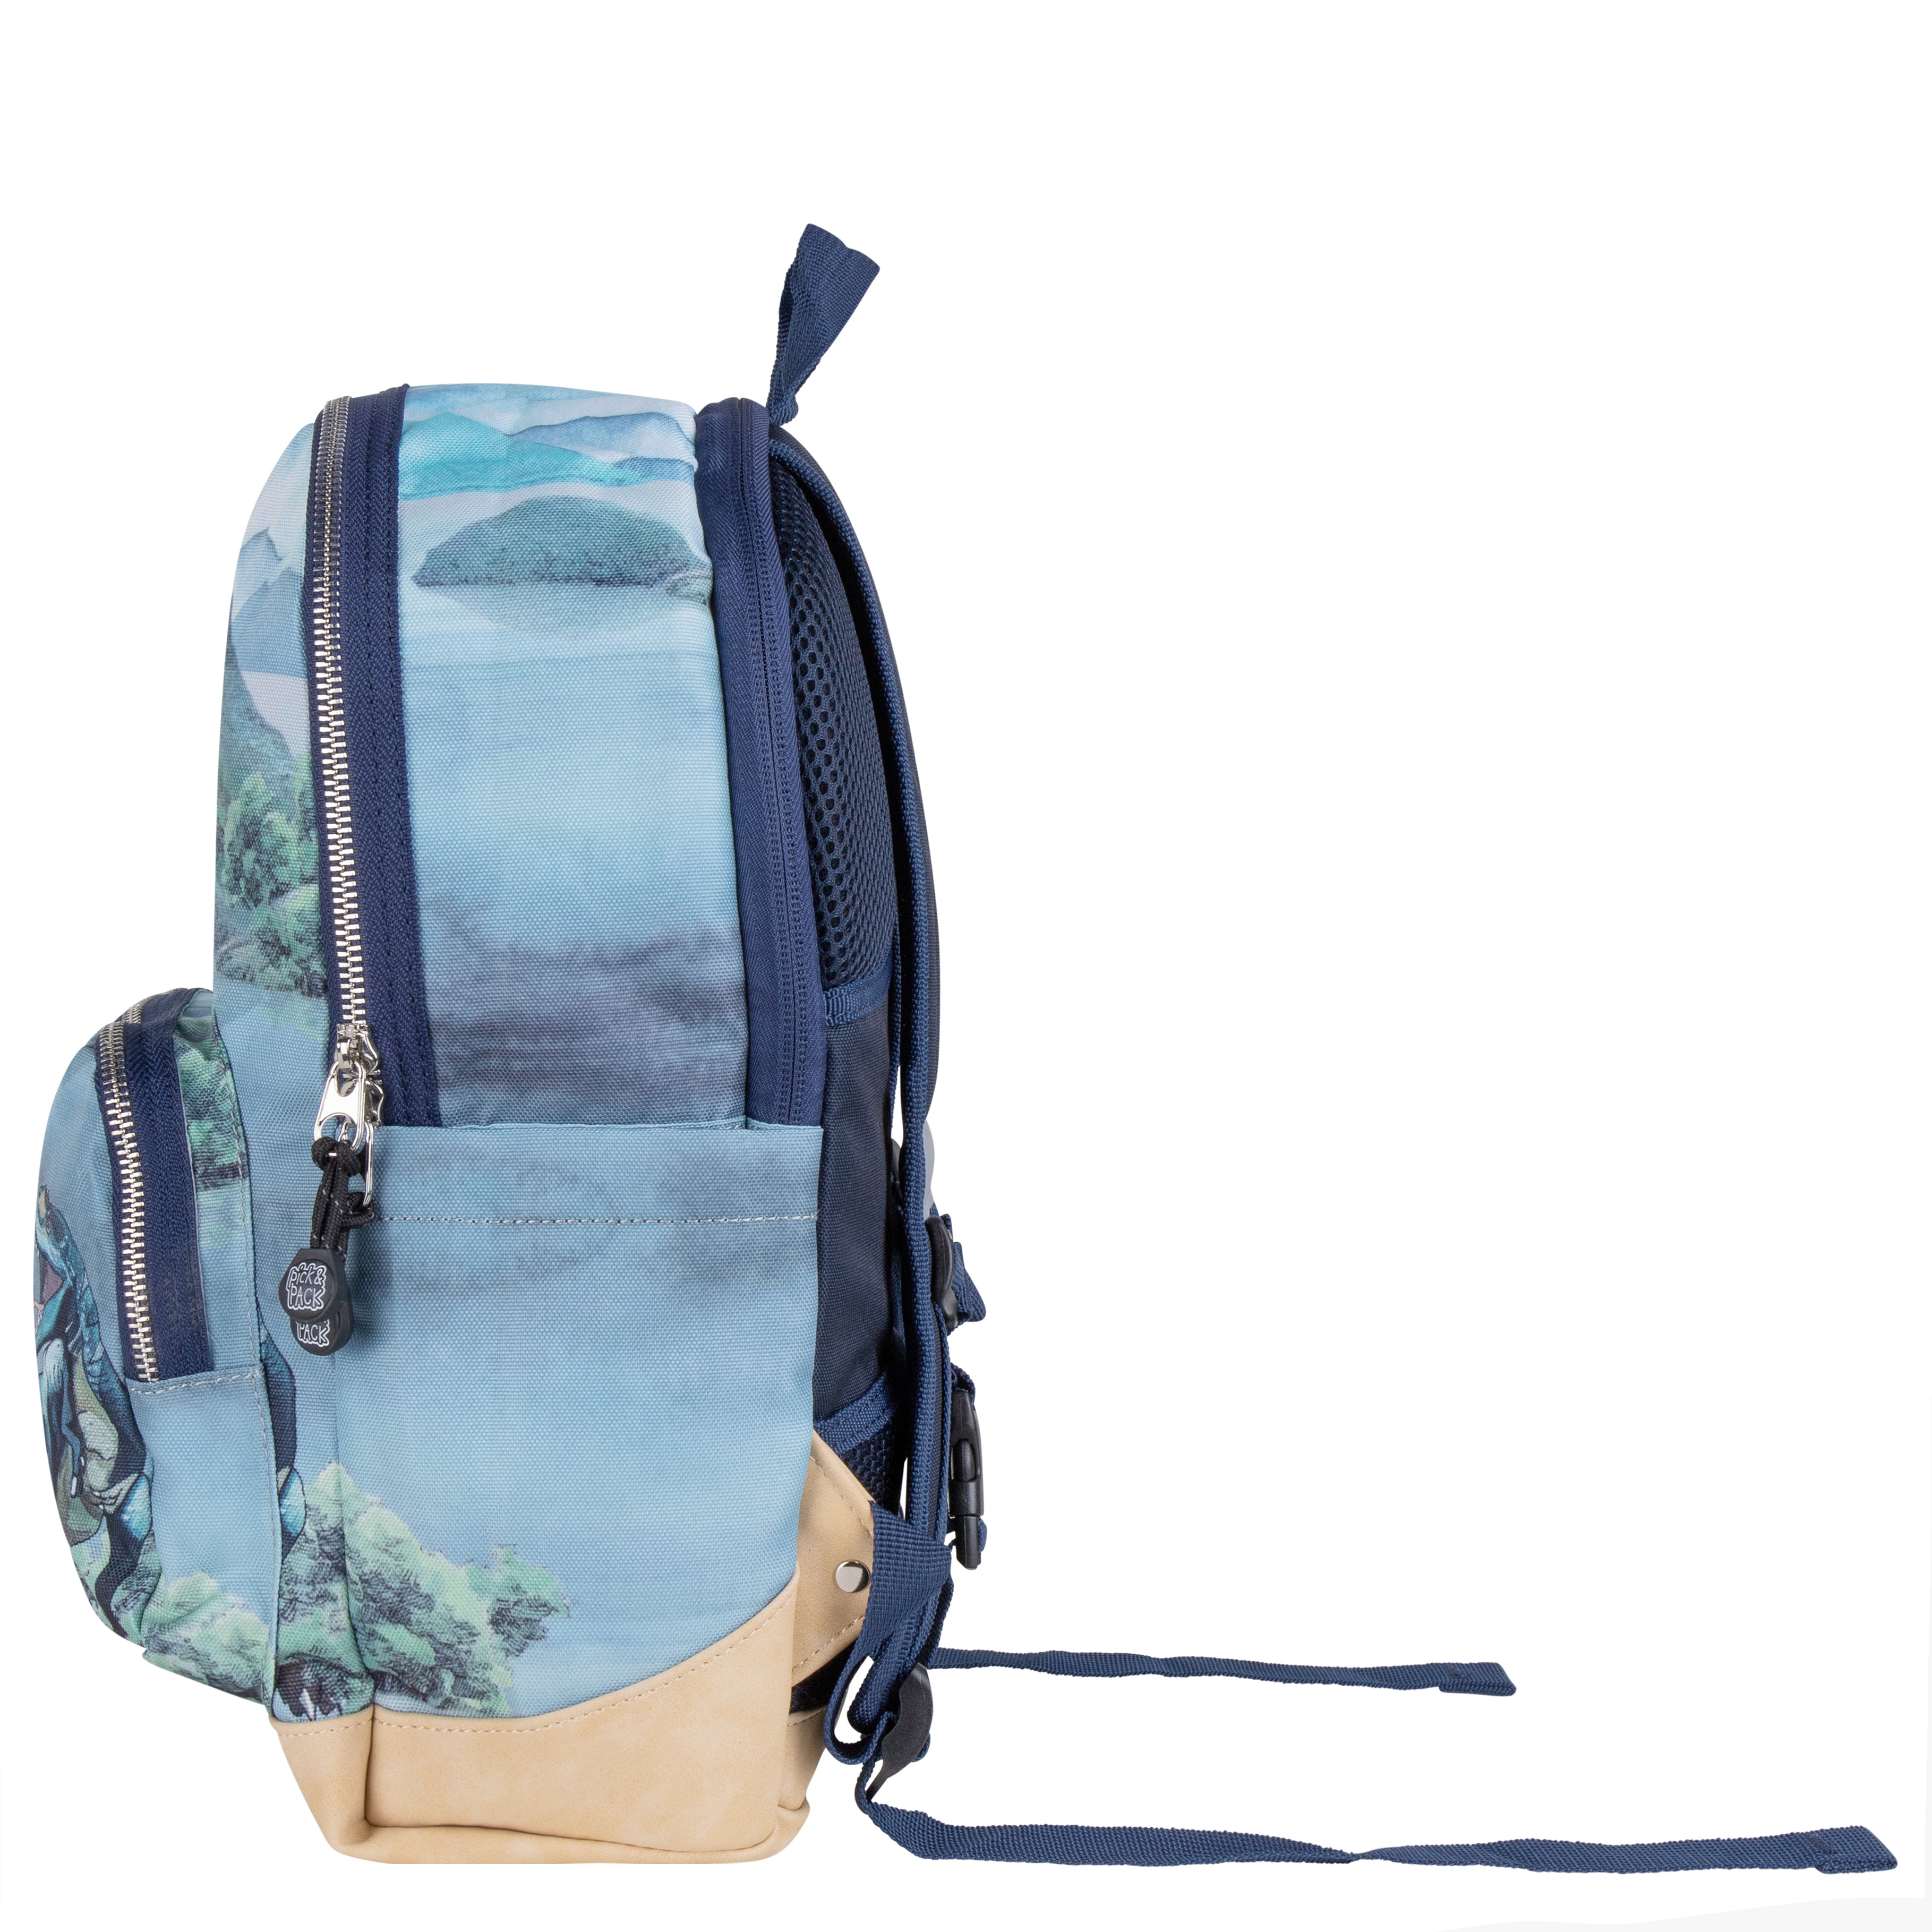 Pick &amp; Pack Backpack Boys - All About Dinos M